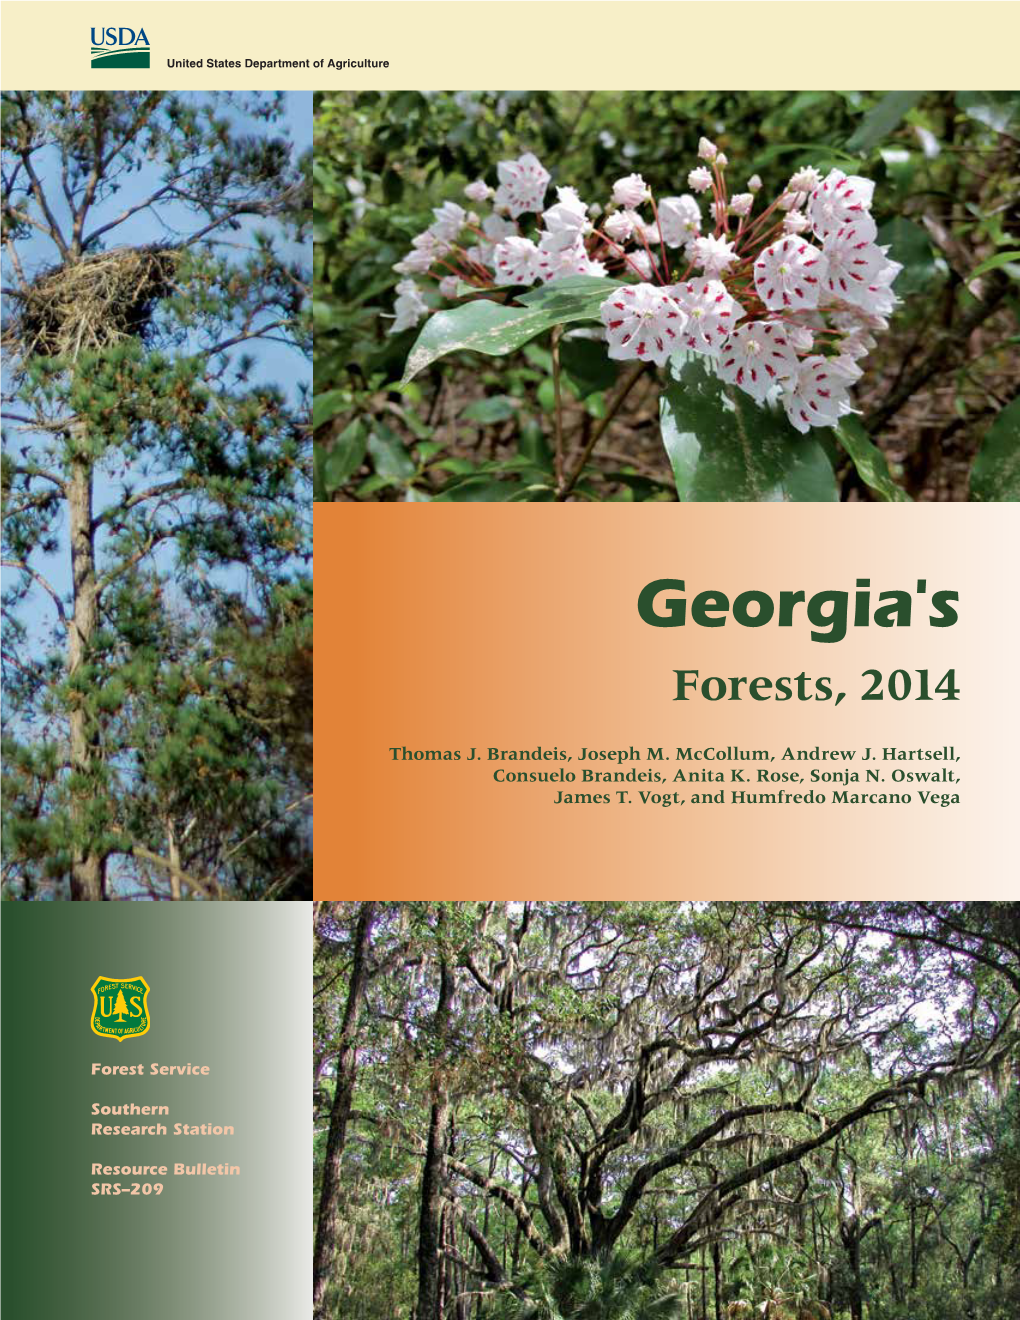 Georgia's Forests, 2014